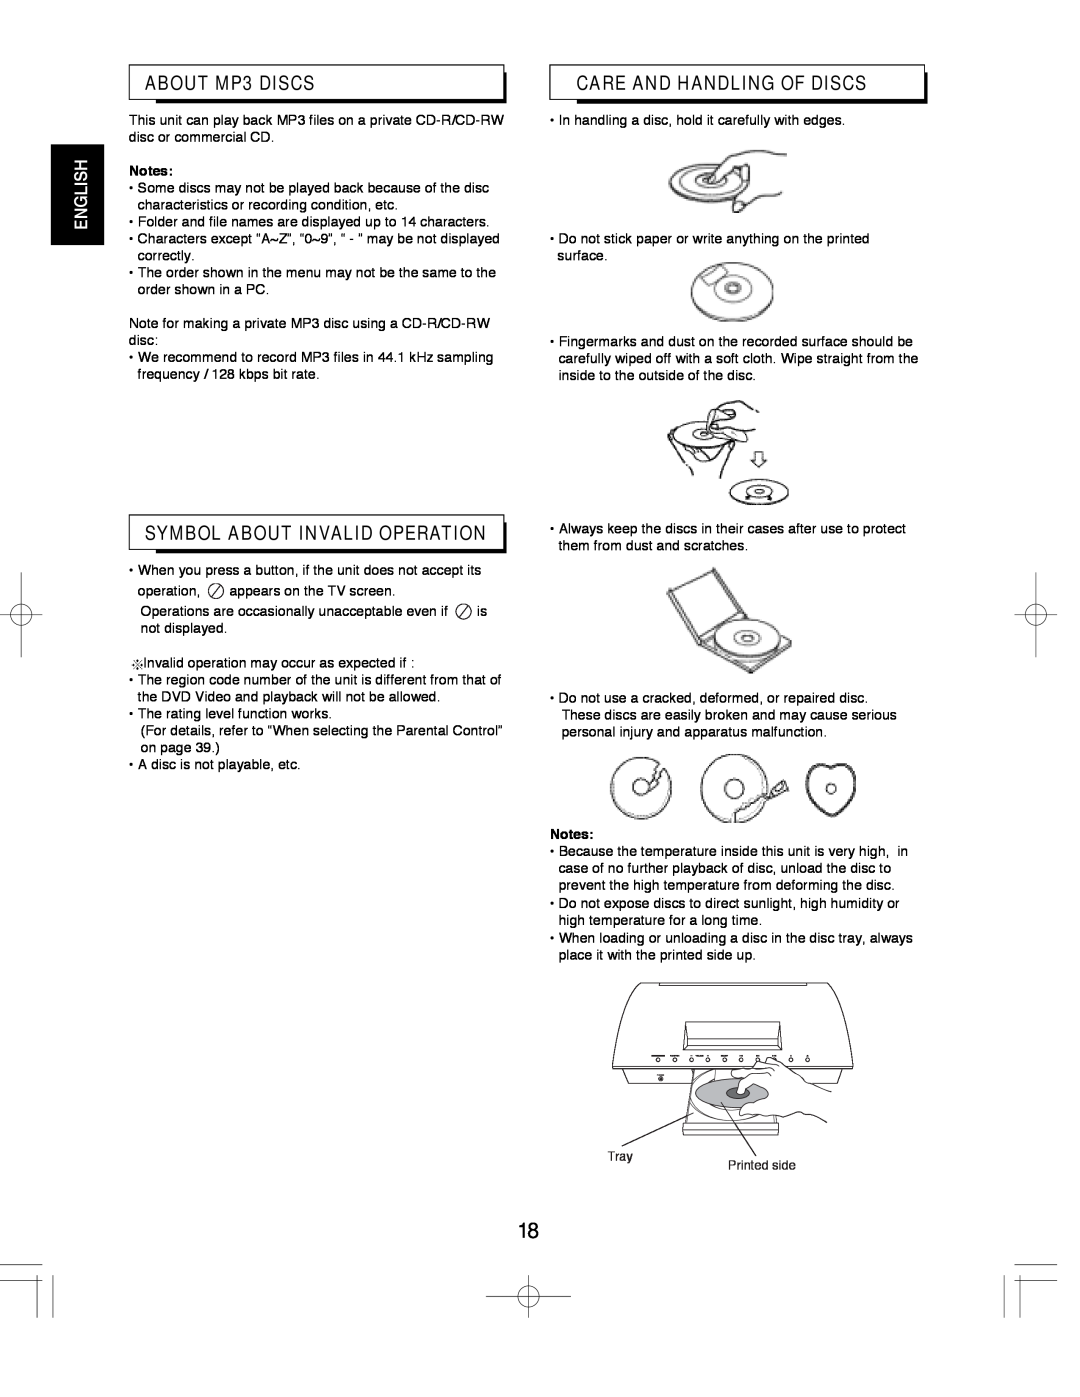 Sherwood VR-670, ST-670, ASW-670 manual ABOUT MP3 DISCS, Symbol About Invalid Operation, Care And Handling Of Discs 